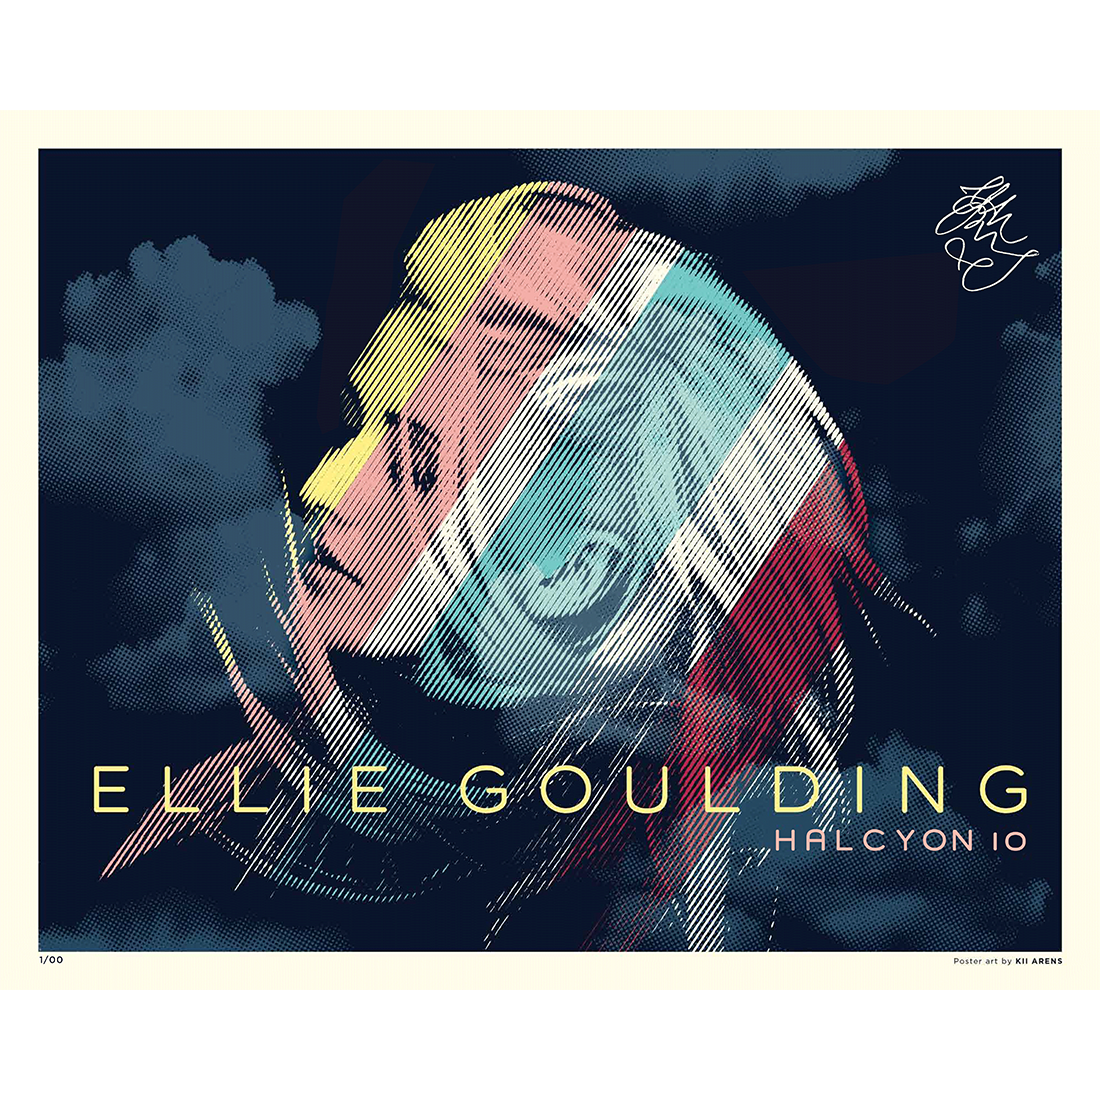 Ellie Goulding - Halcyon 10th Anniversary Lithograph 